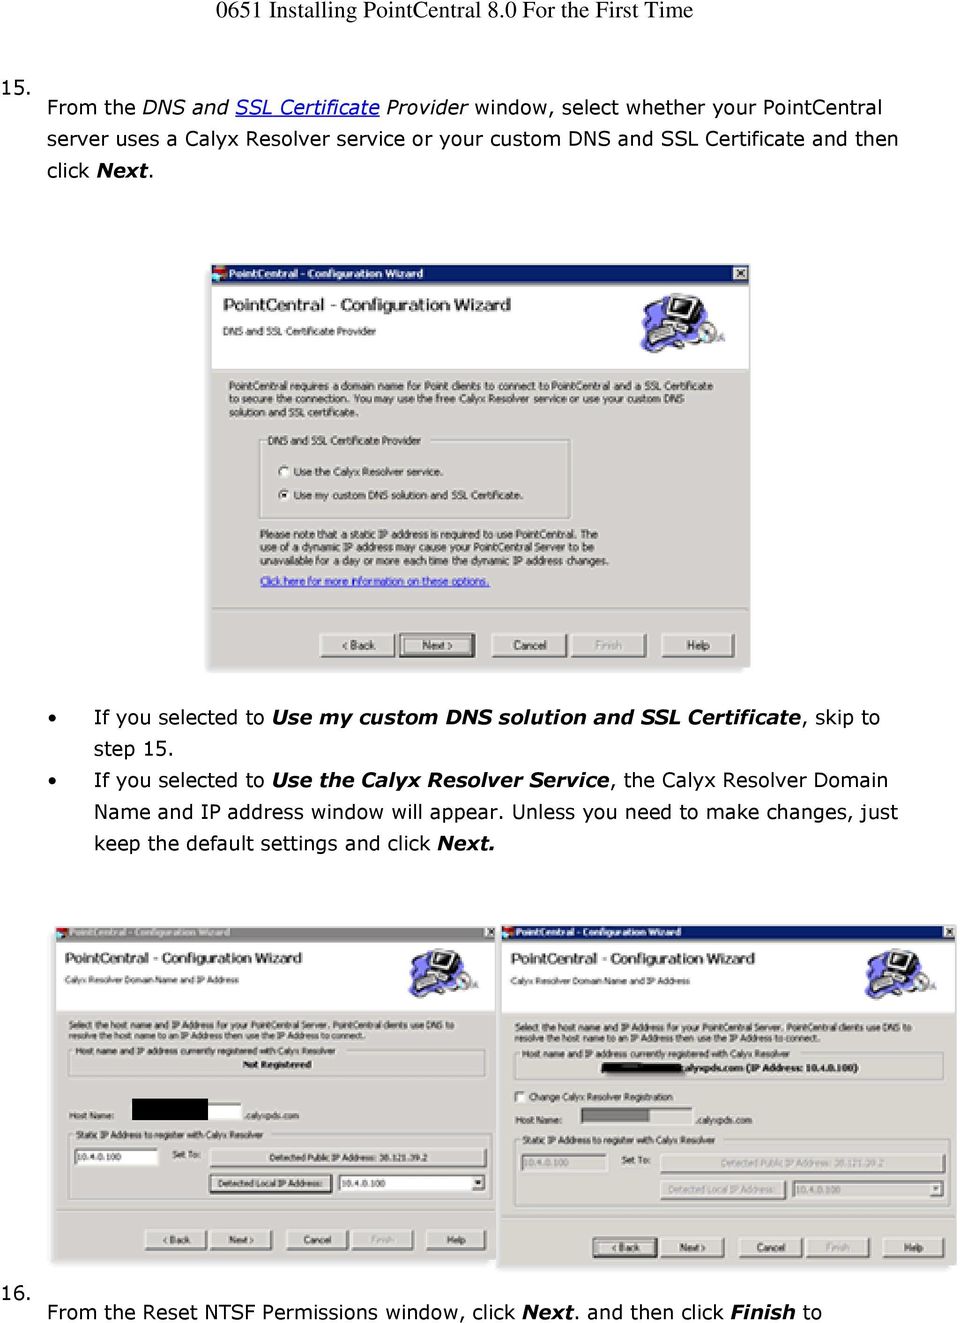 If you selected to Use the Calyx Resolver Service, the Calyx Resolver Domain Name and IP address window will appear.